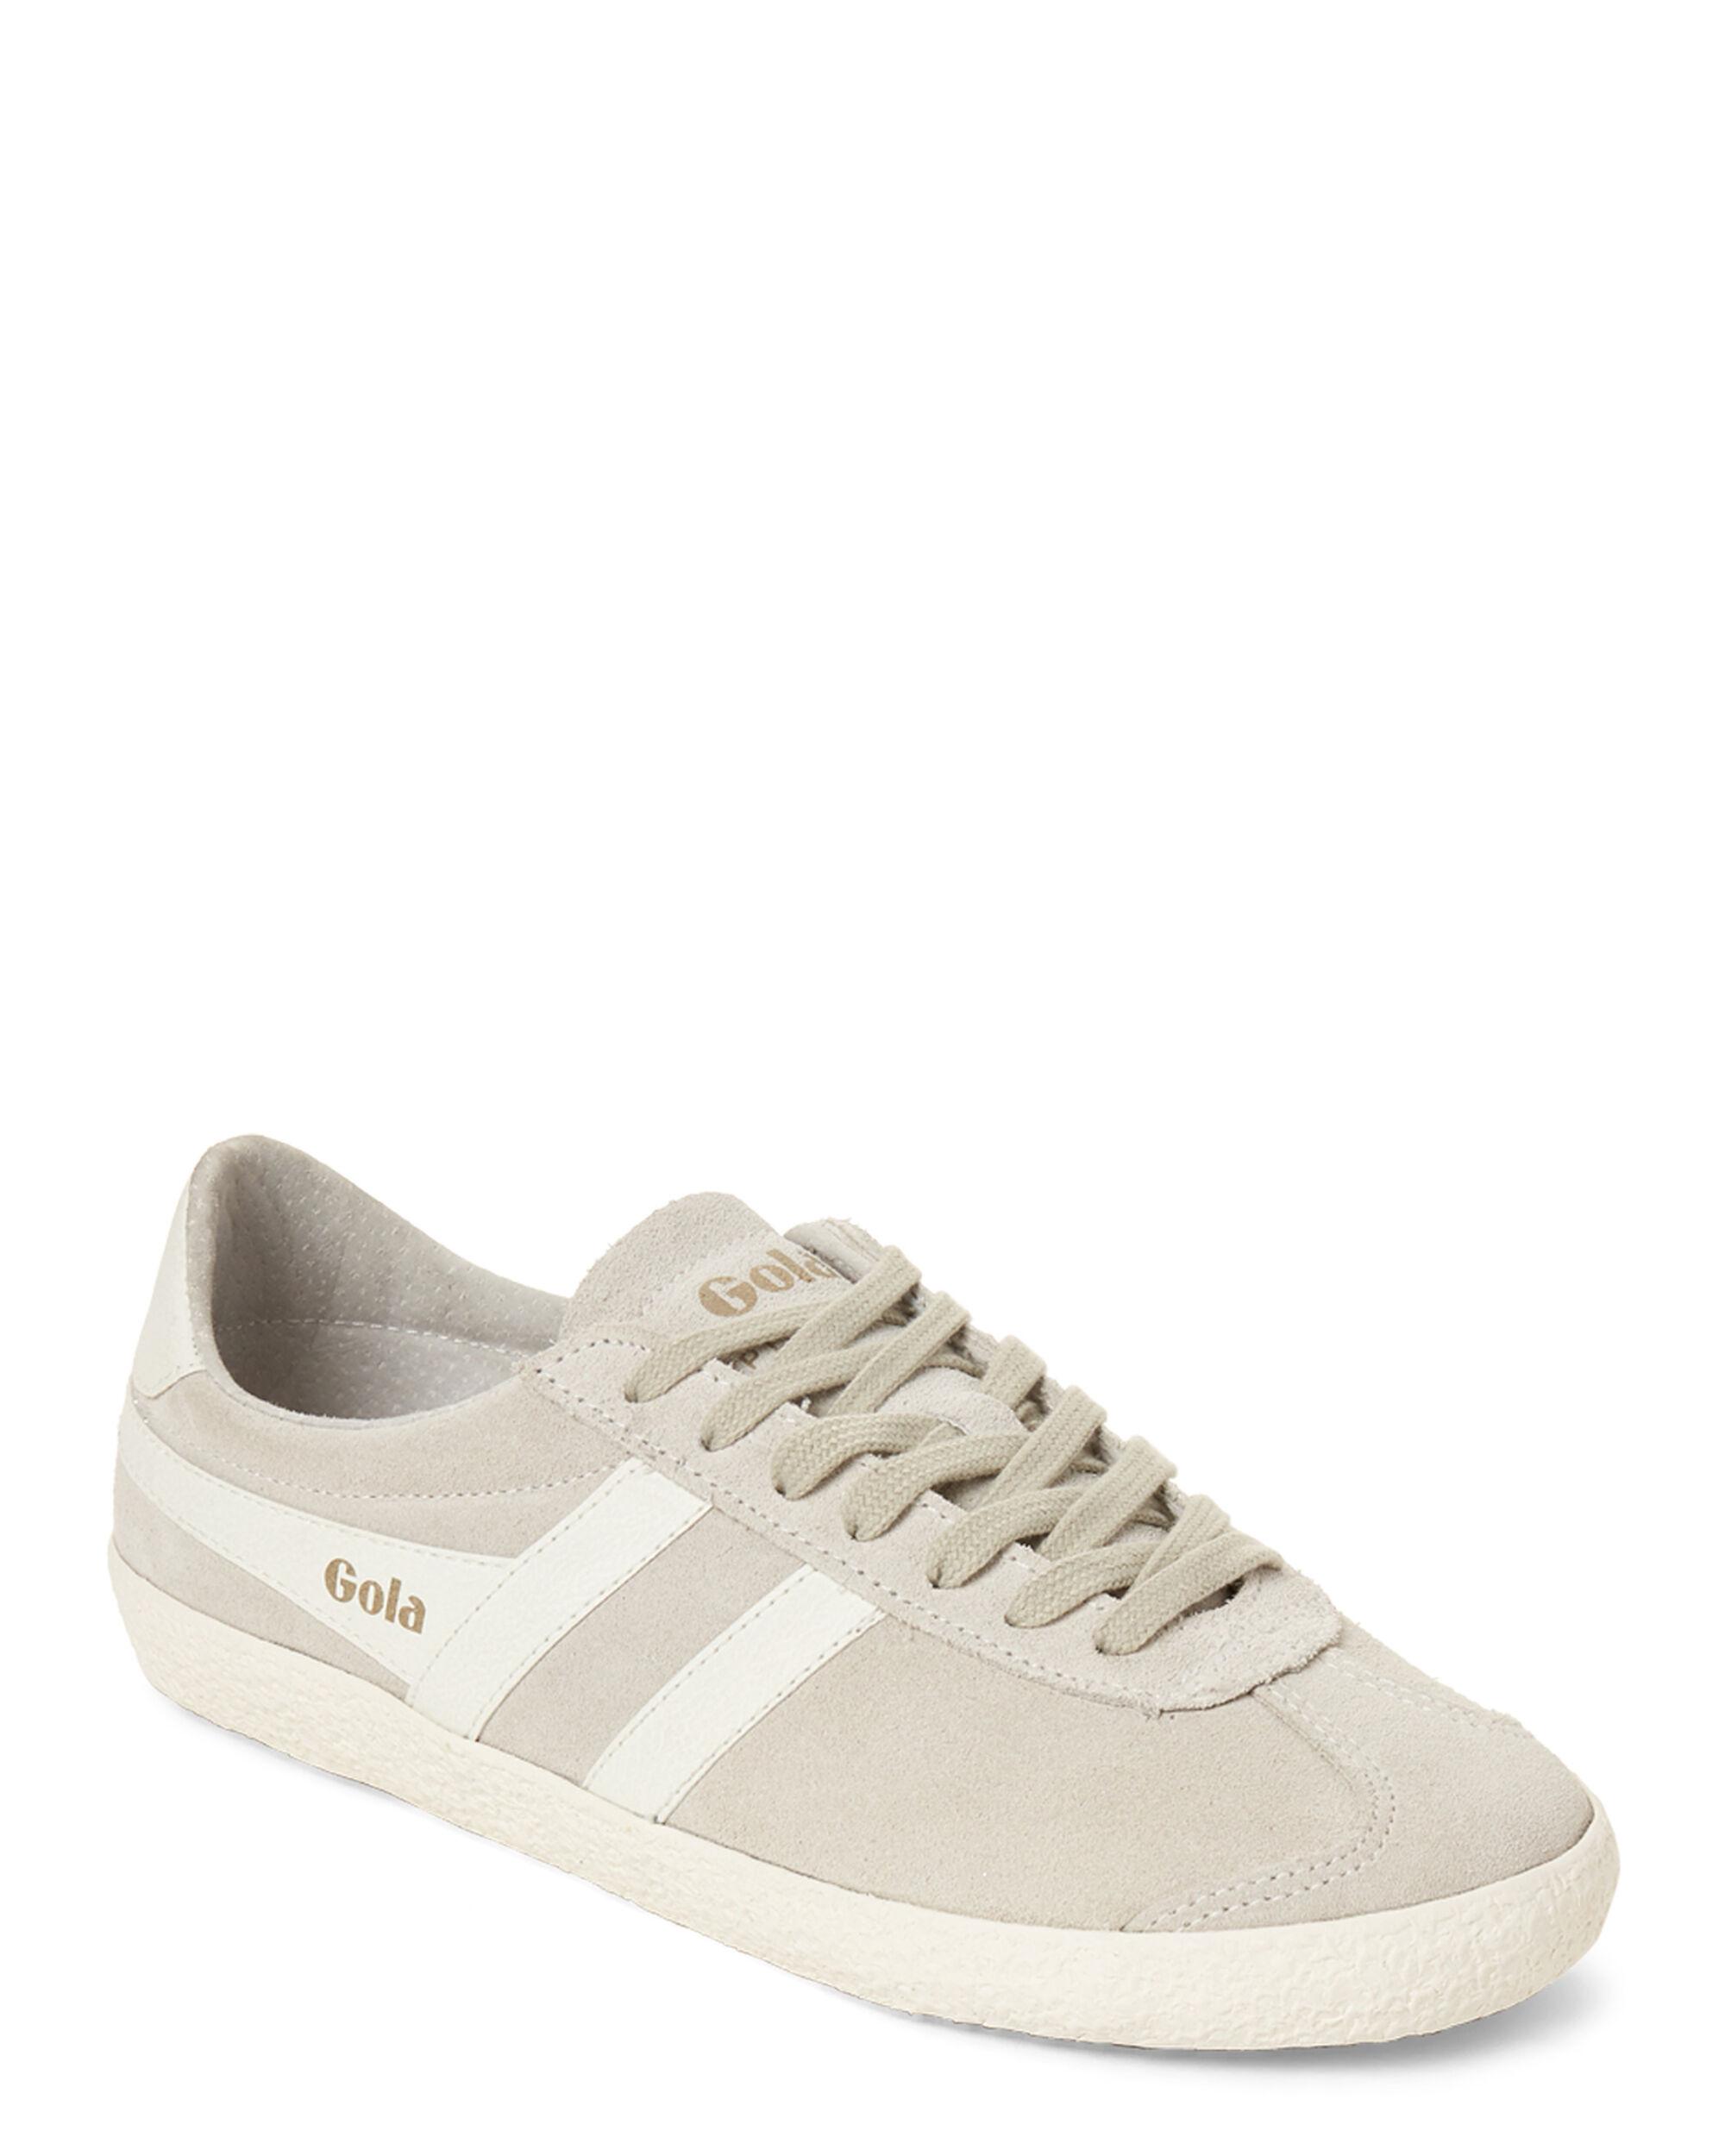 Gola Off-white & White Specialist Suede Low-top Sneakers - Lyst